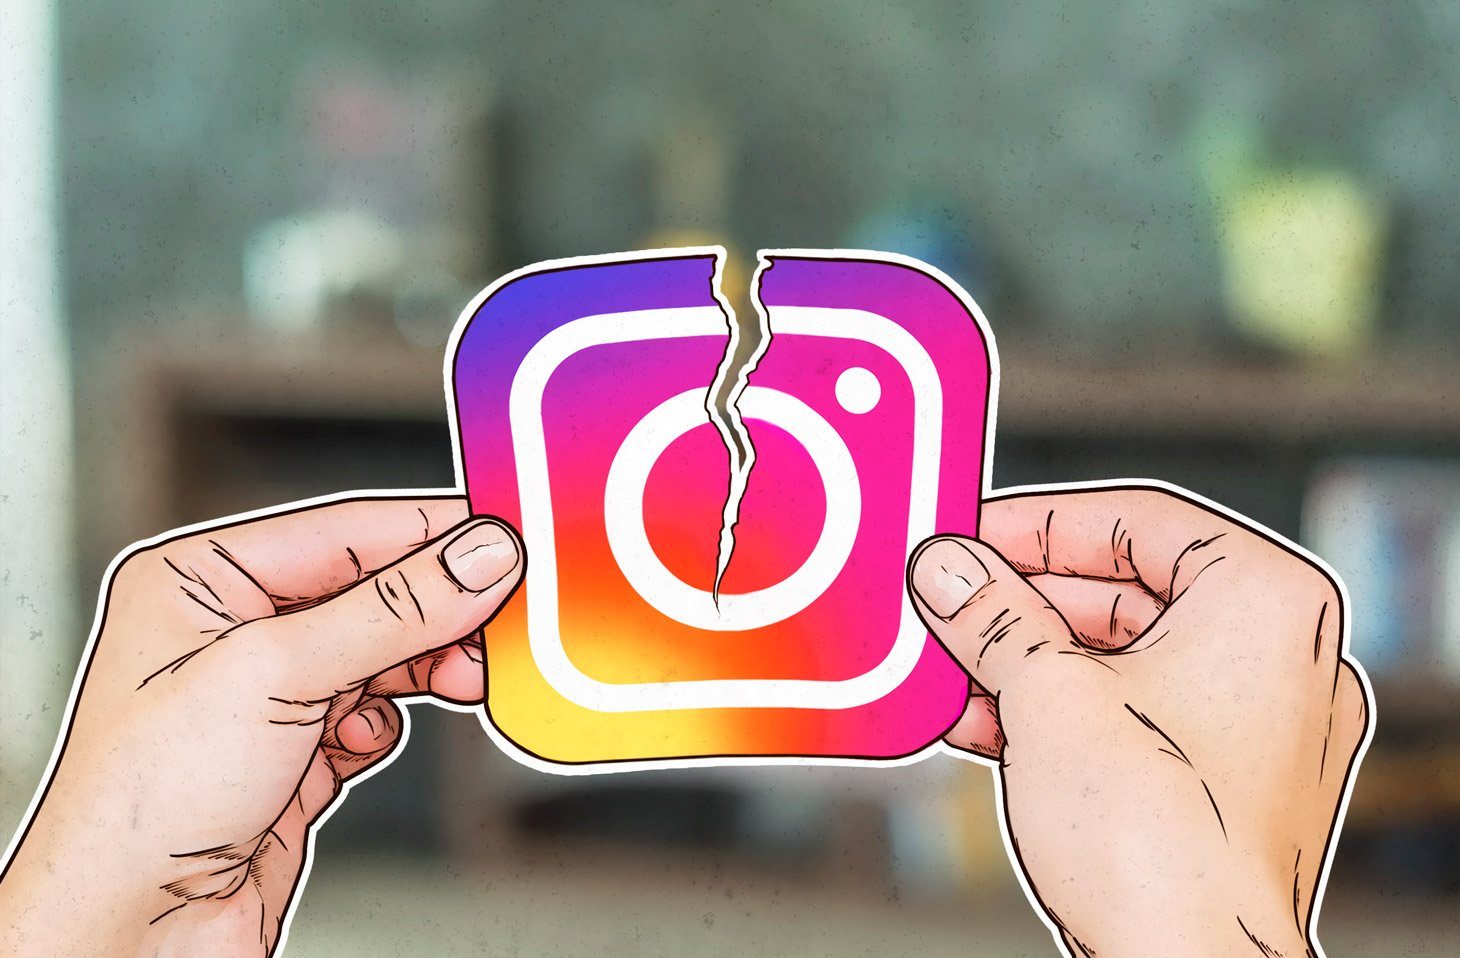 how-to-delete-a-photo-on-instagram